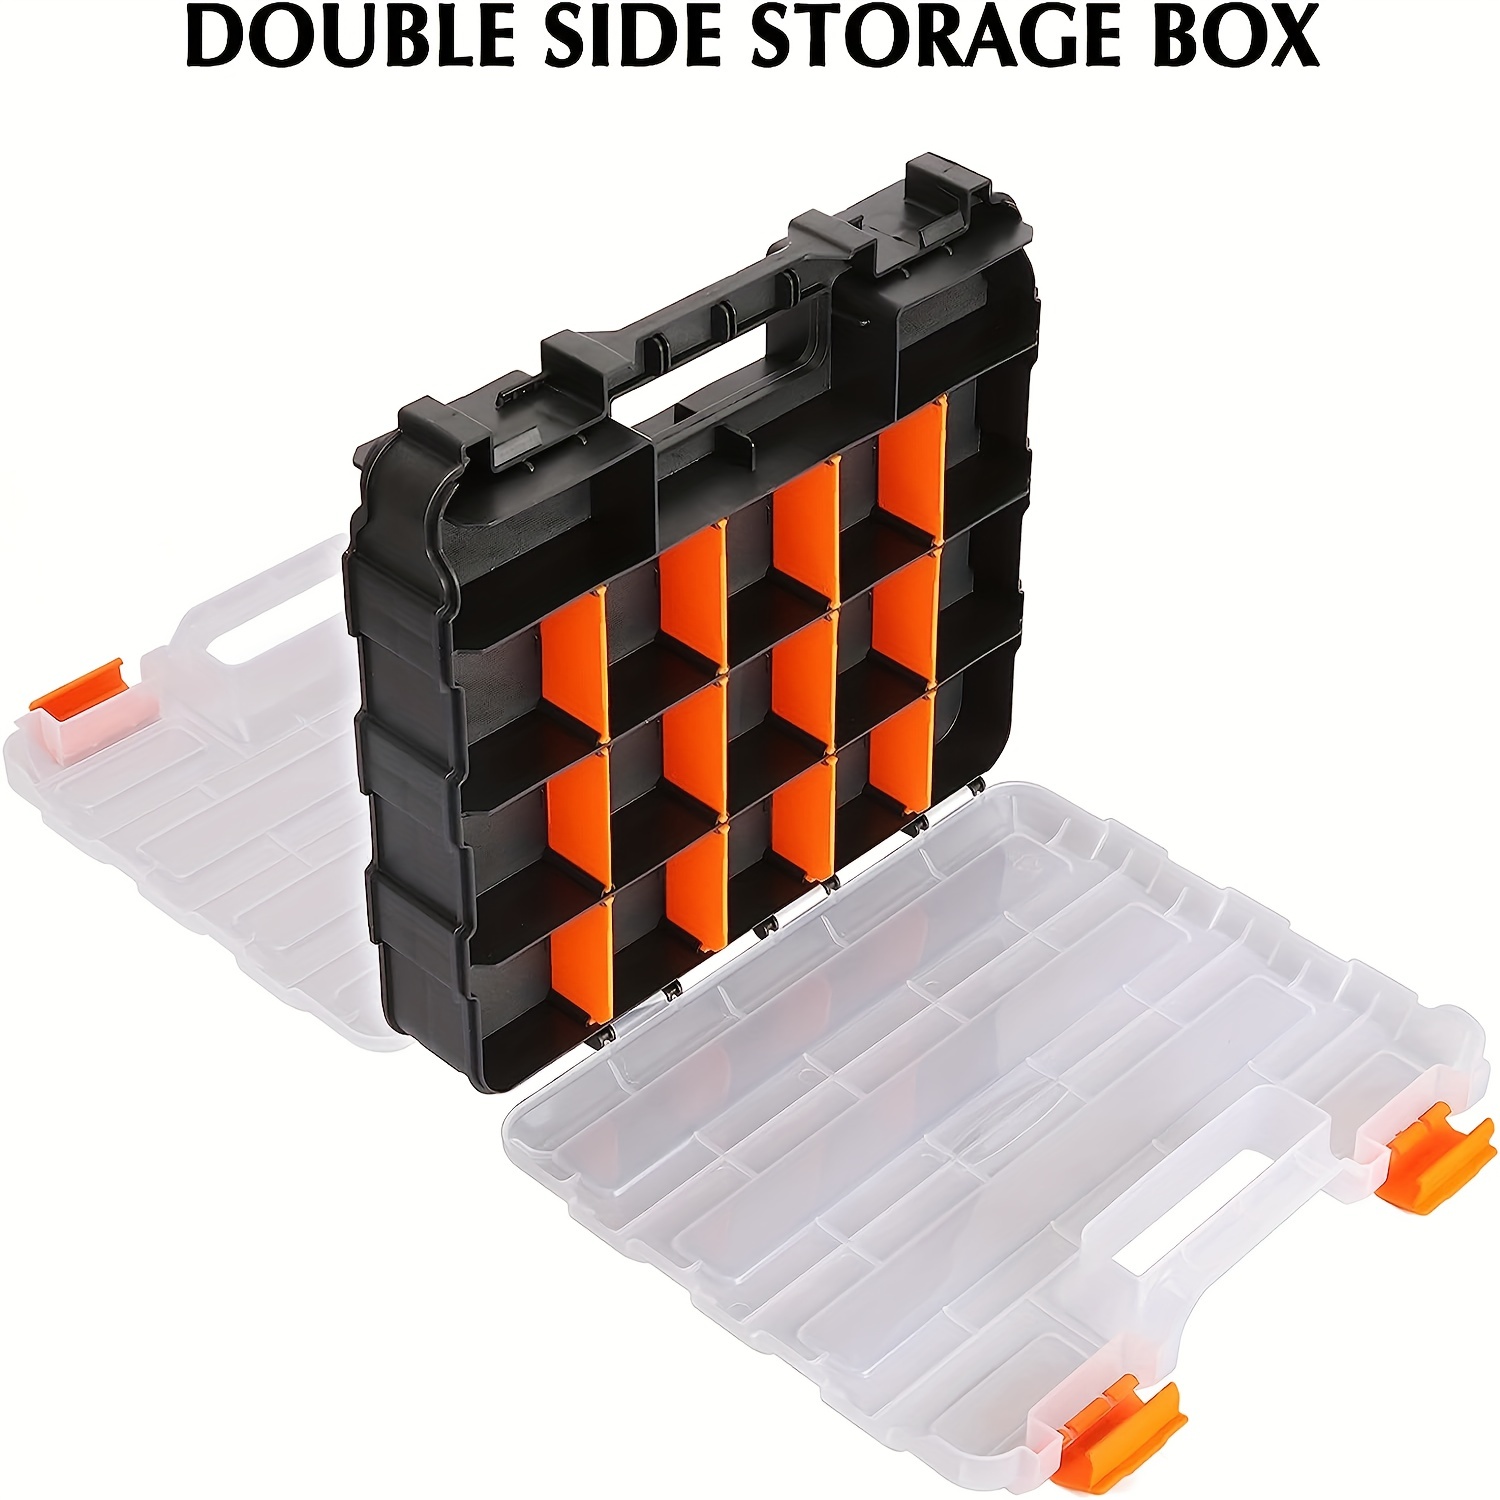 1pc double side tool box organizer hardware storage box portable small parts organizer with removable plastic dividers for screws nuts nails bolts